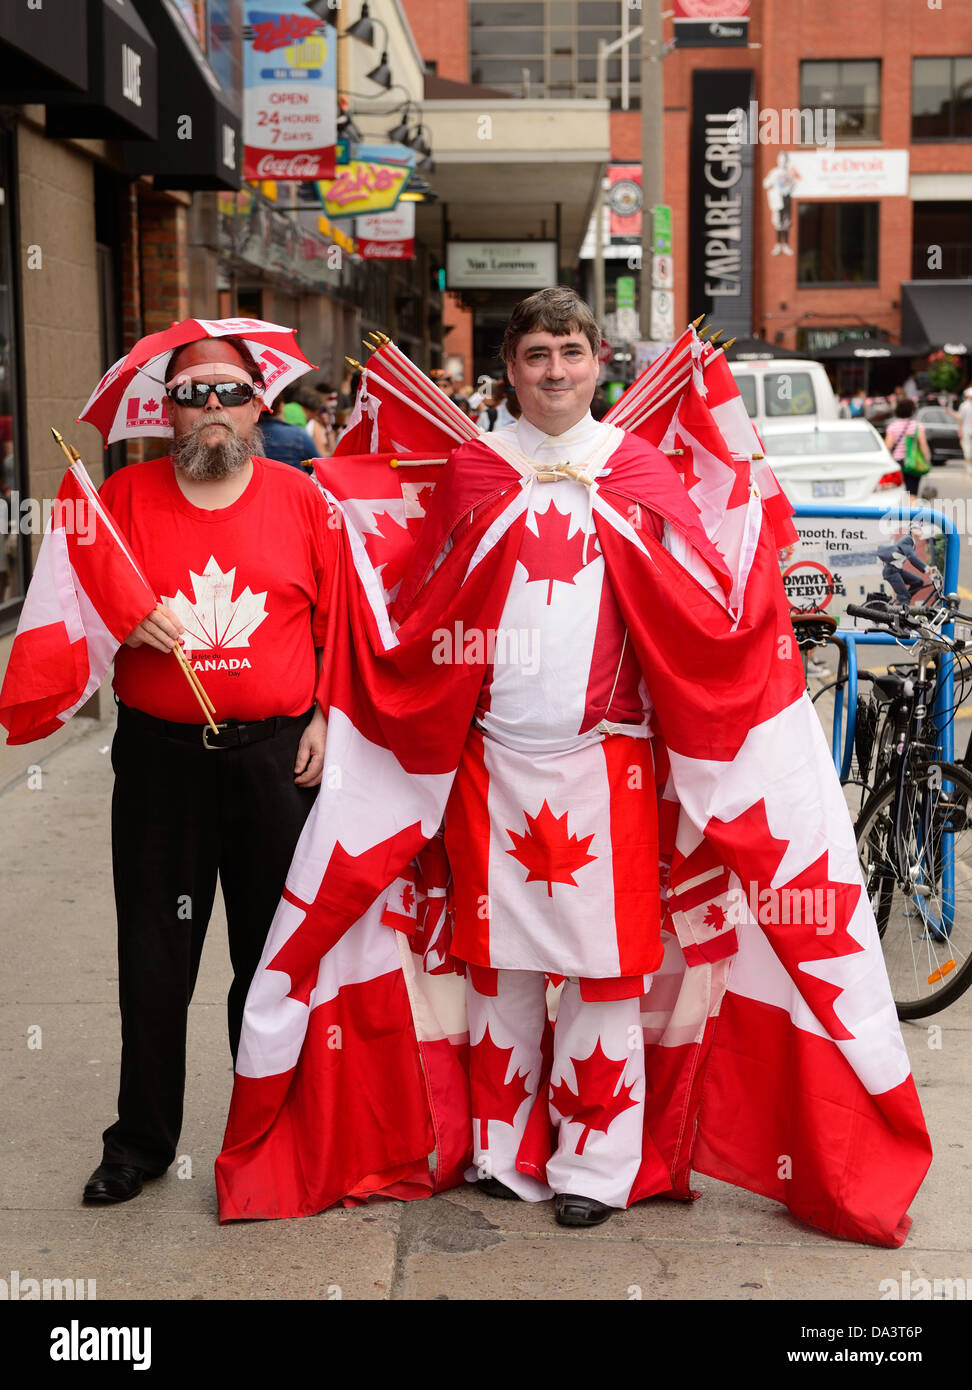 Canada Day revelers display their patriotism at the annual Canada Day celebration in July 1, 2013 in Ottawa, Ontario Canada. Stock Photo